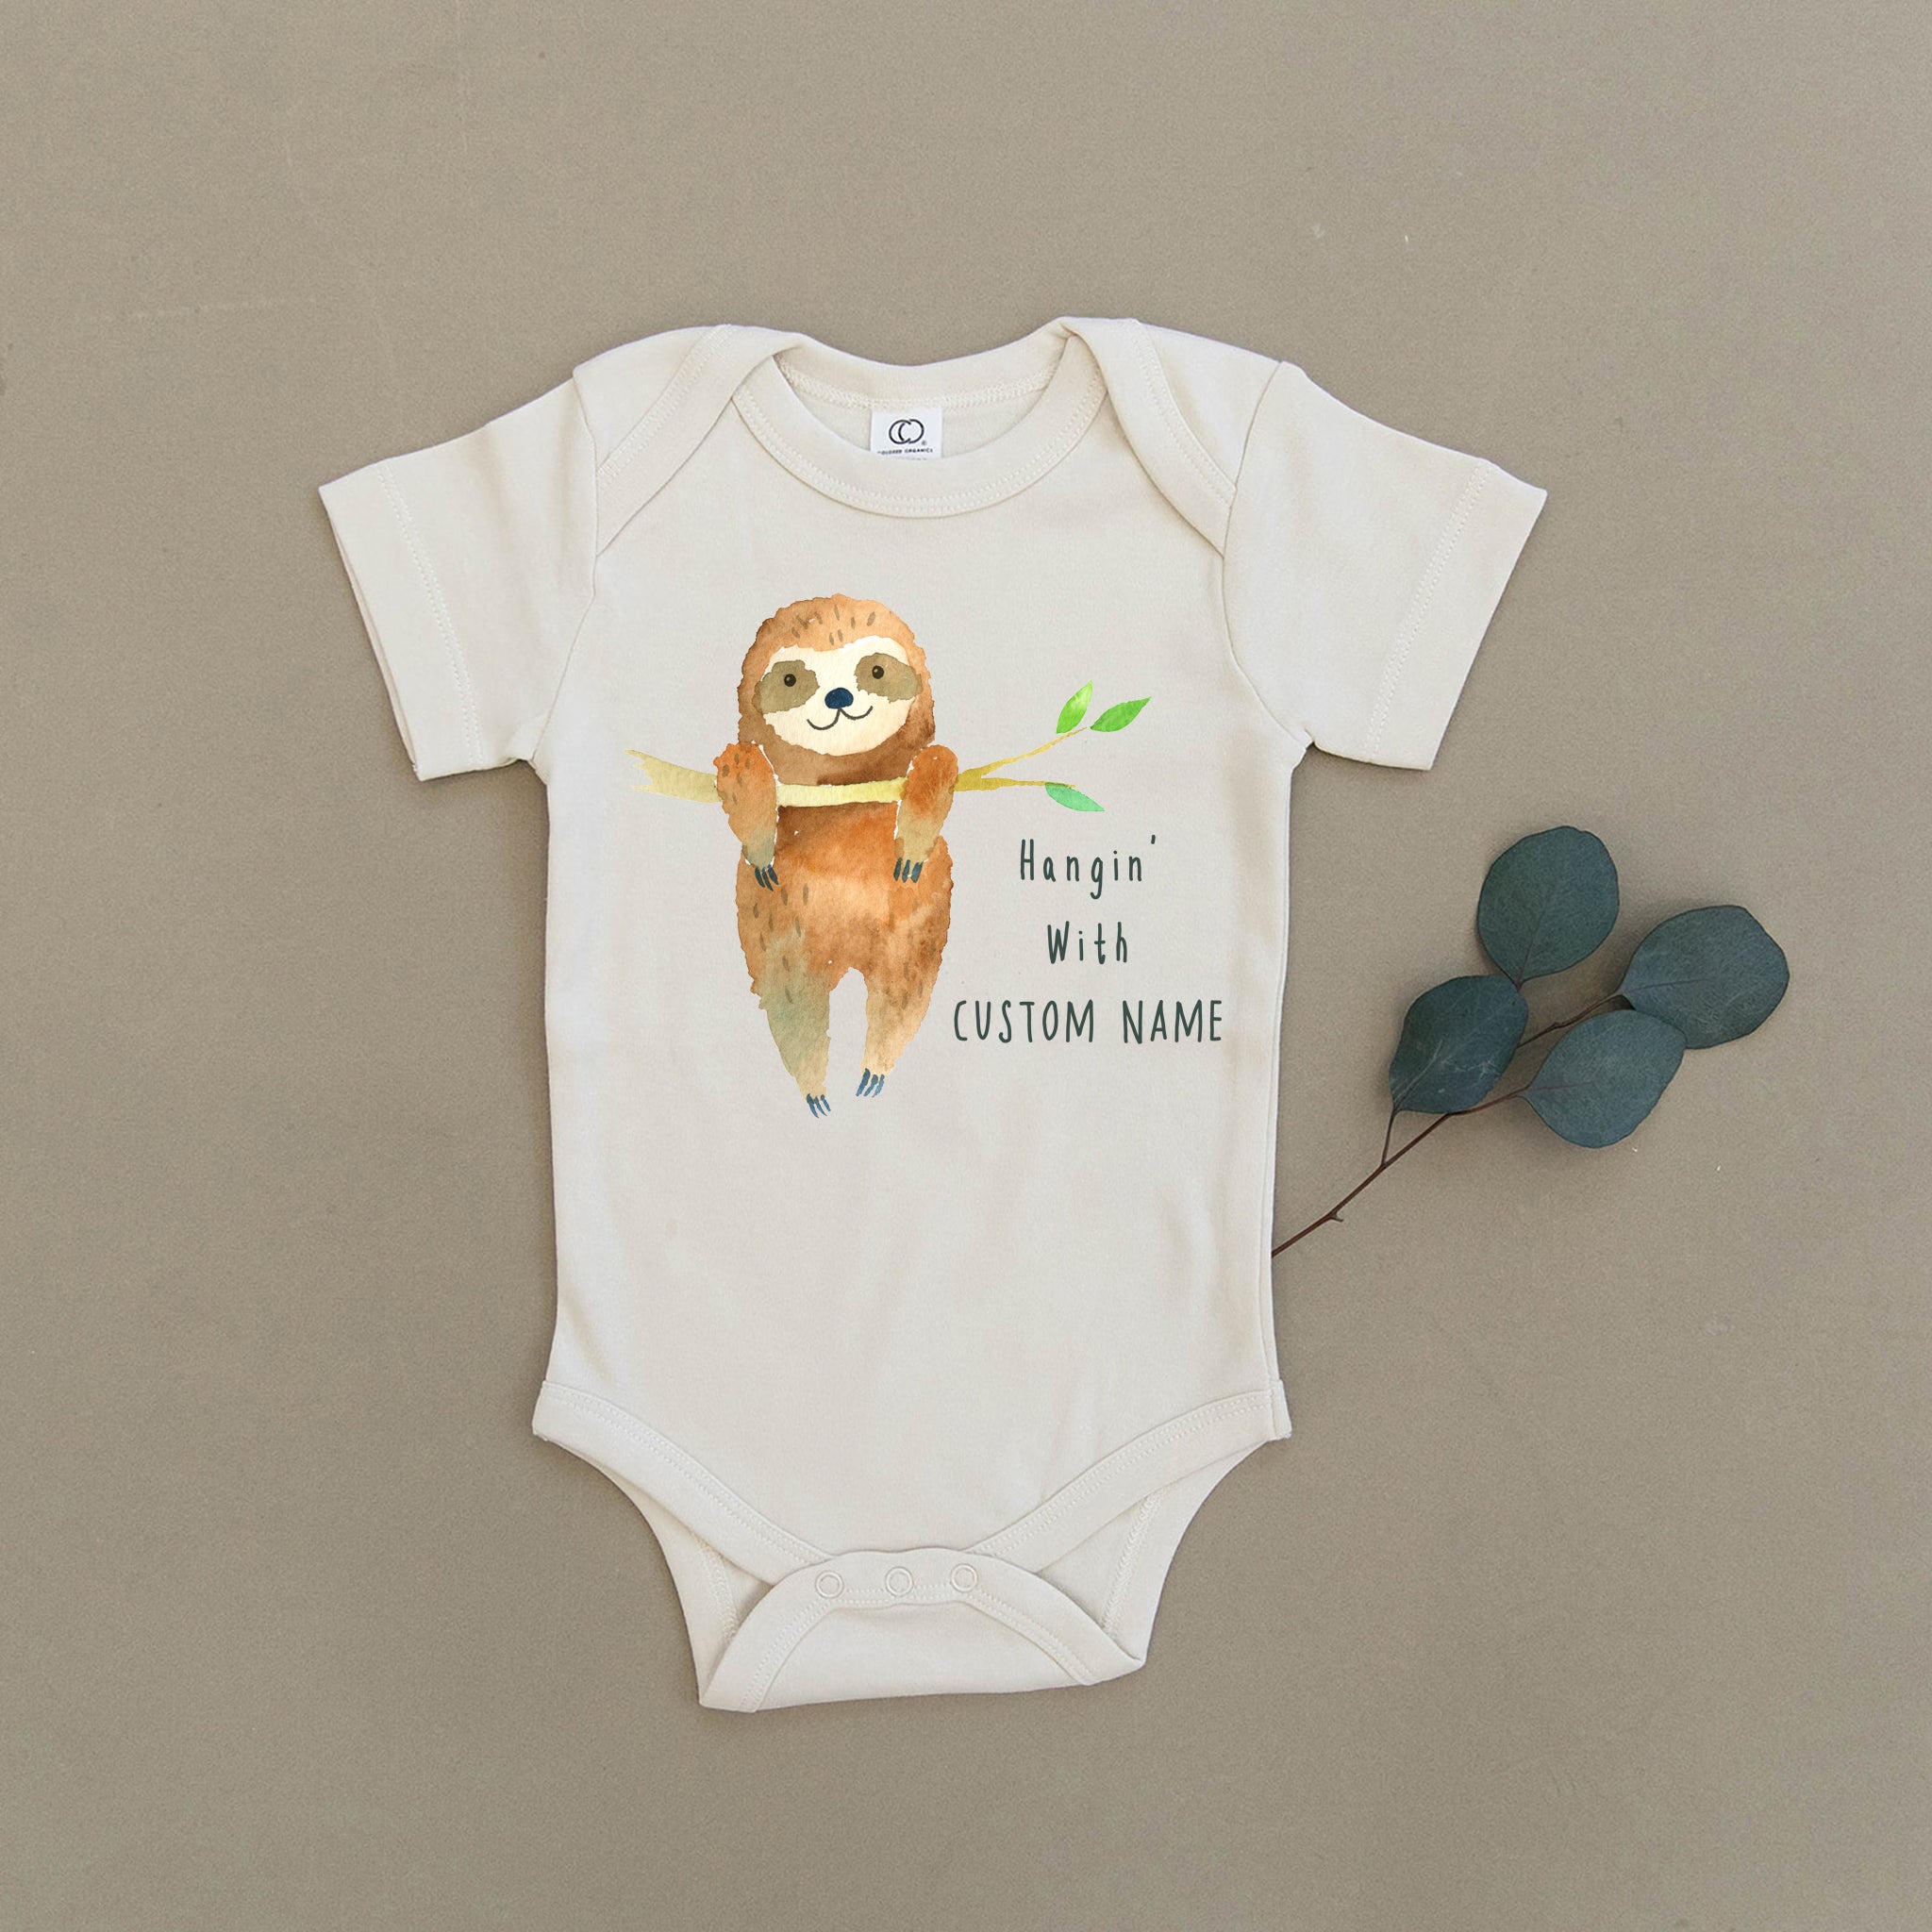 sloth newborn outfit